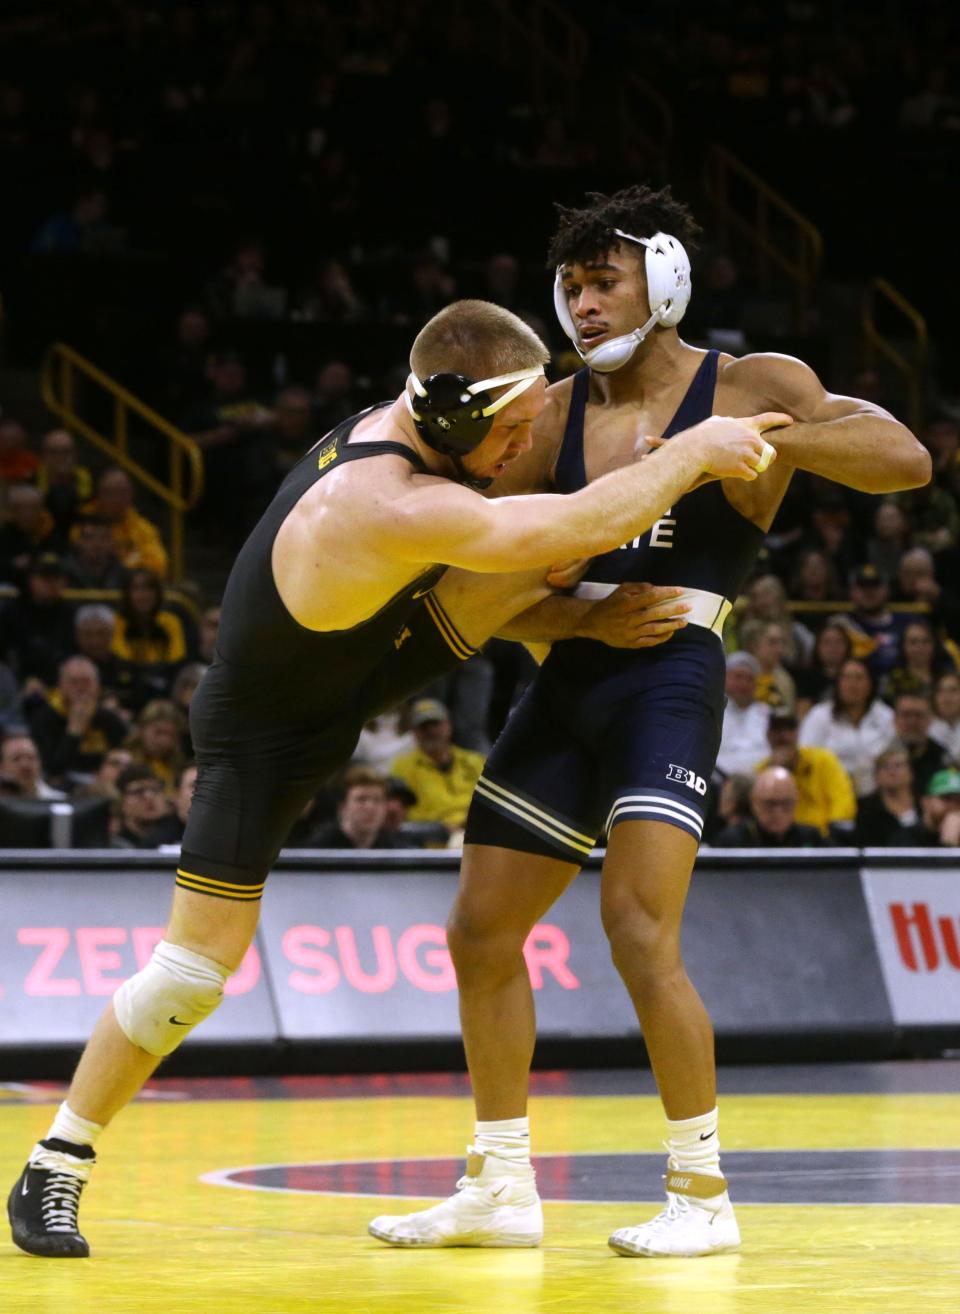 Iowa’s Patrick Kennedy, left, wrestles Penn State’s Carter Starocci in a 174-pound match at Iowa's Carver-Hawkeye Arena on Feb. 9. Starocci appeared to injure his right knee during the Nittany Lions' home dual vs. Edinboro University on Feb. 25. However, the 2019 Cathedral Prep graduate indicated in a March 1 social media post that he expects to participate in this weekend's Big Ten Conference tournament at College Park, Maryland.